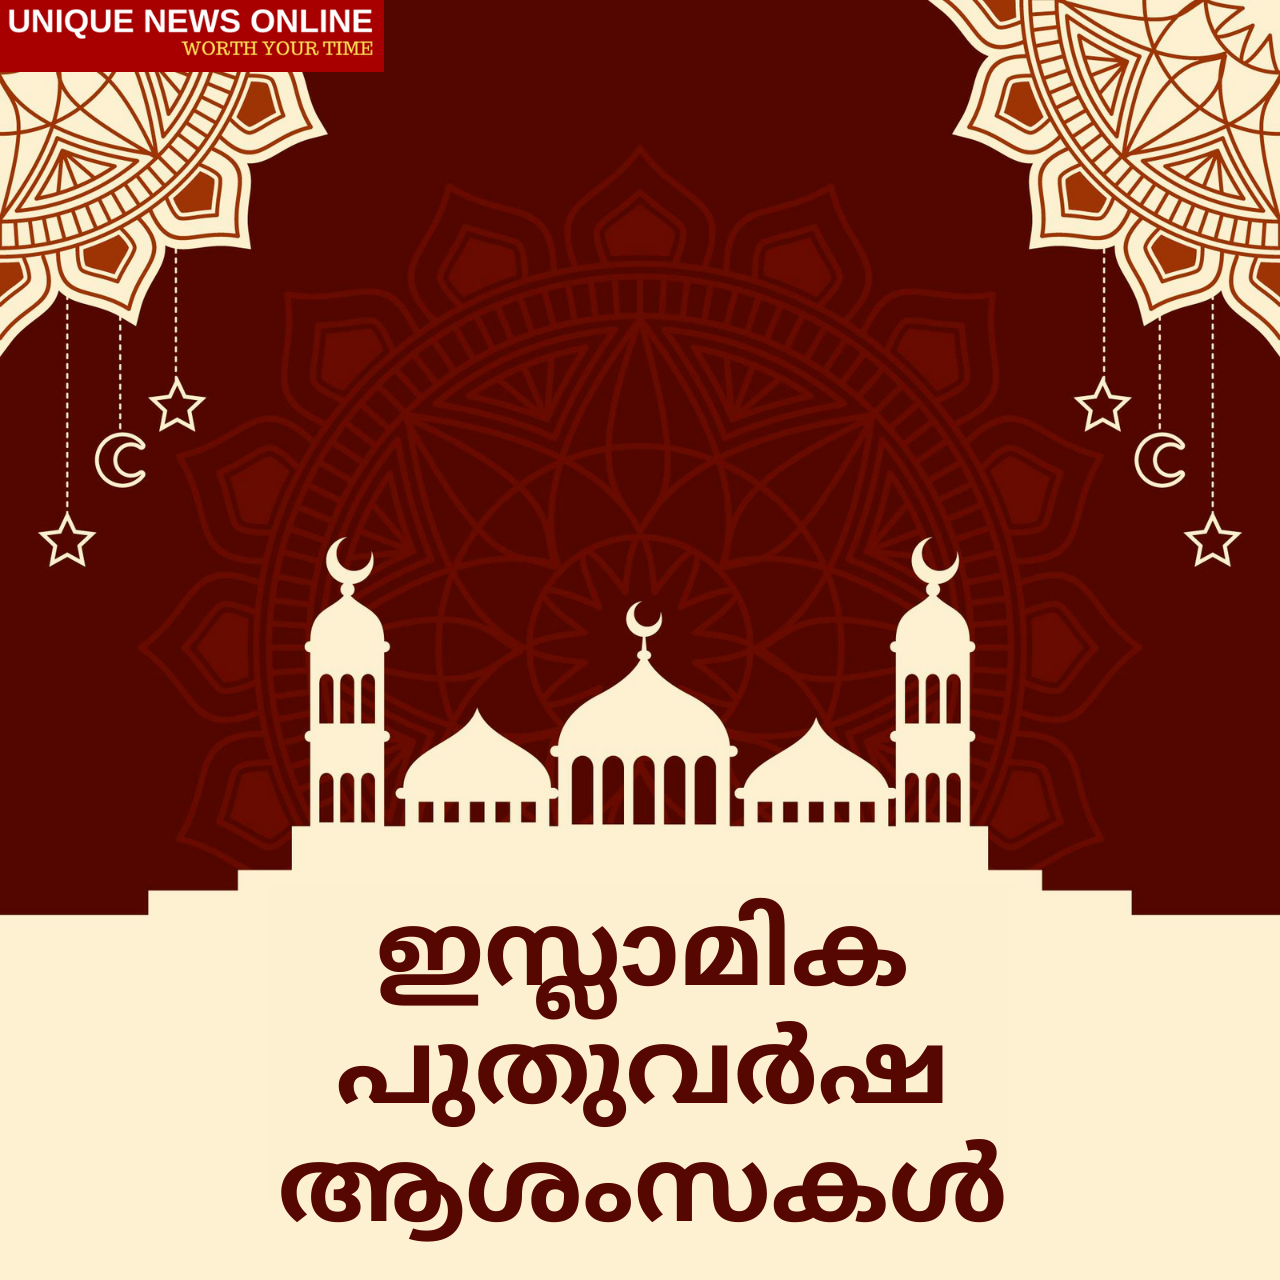 Islamic New Year 2021 Tamil and Malayalam Shayari, Greetings, HD Images, Wishes, Messages, Quotes and Status to wish your Relatives